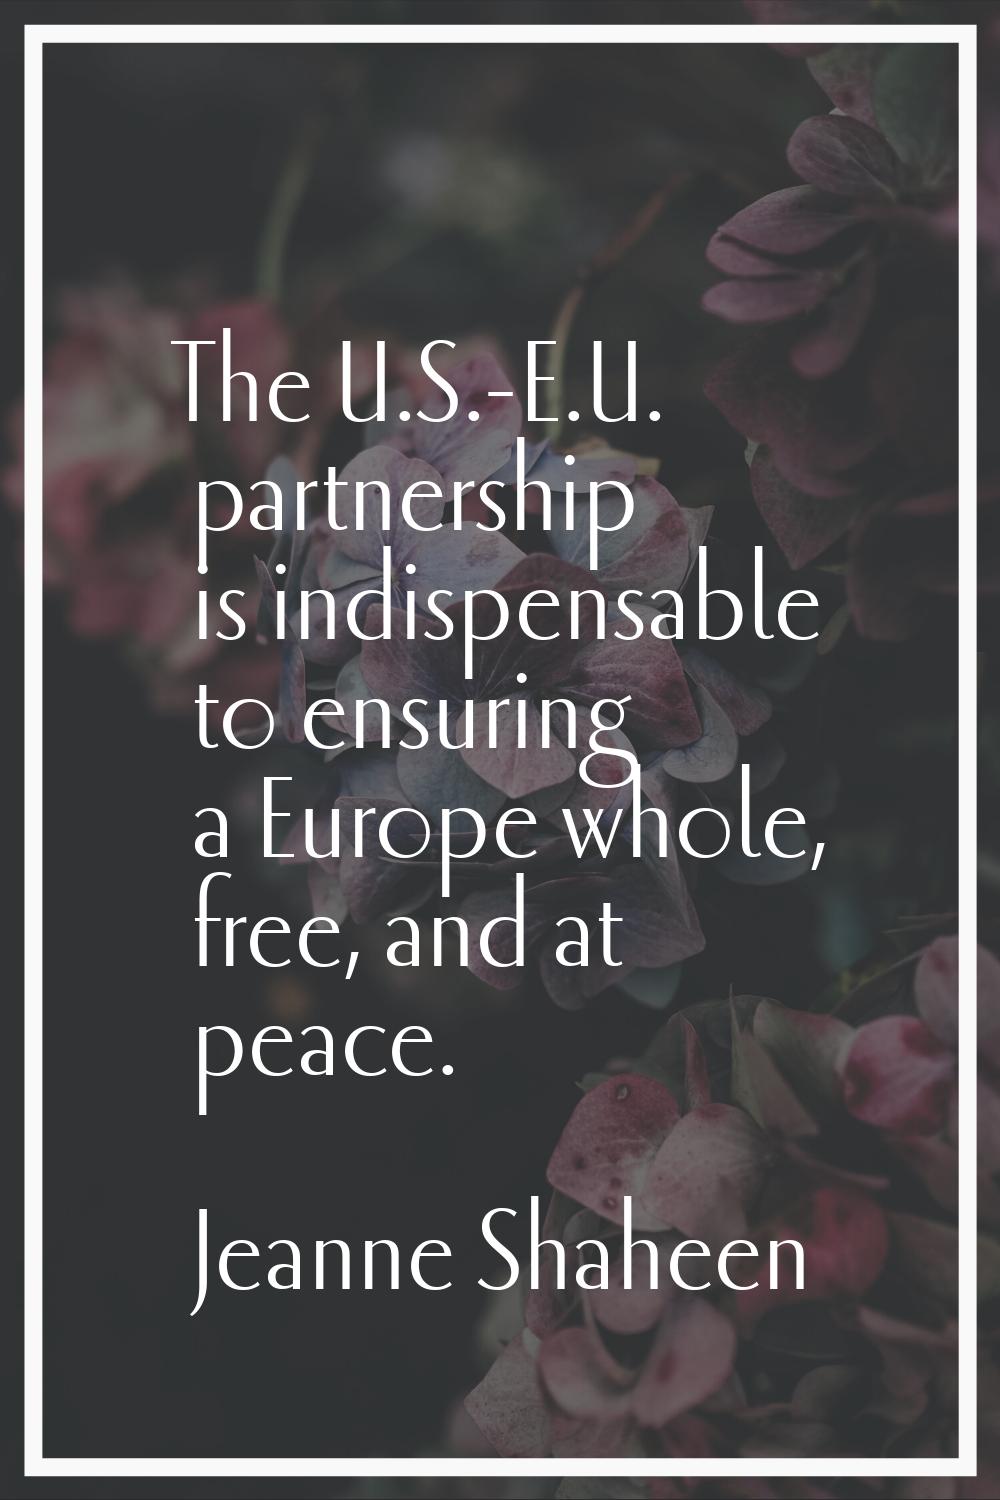 The U.S.-E.U. partnership is indispensable to ensuring a Europe whole, free, and at peace.